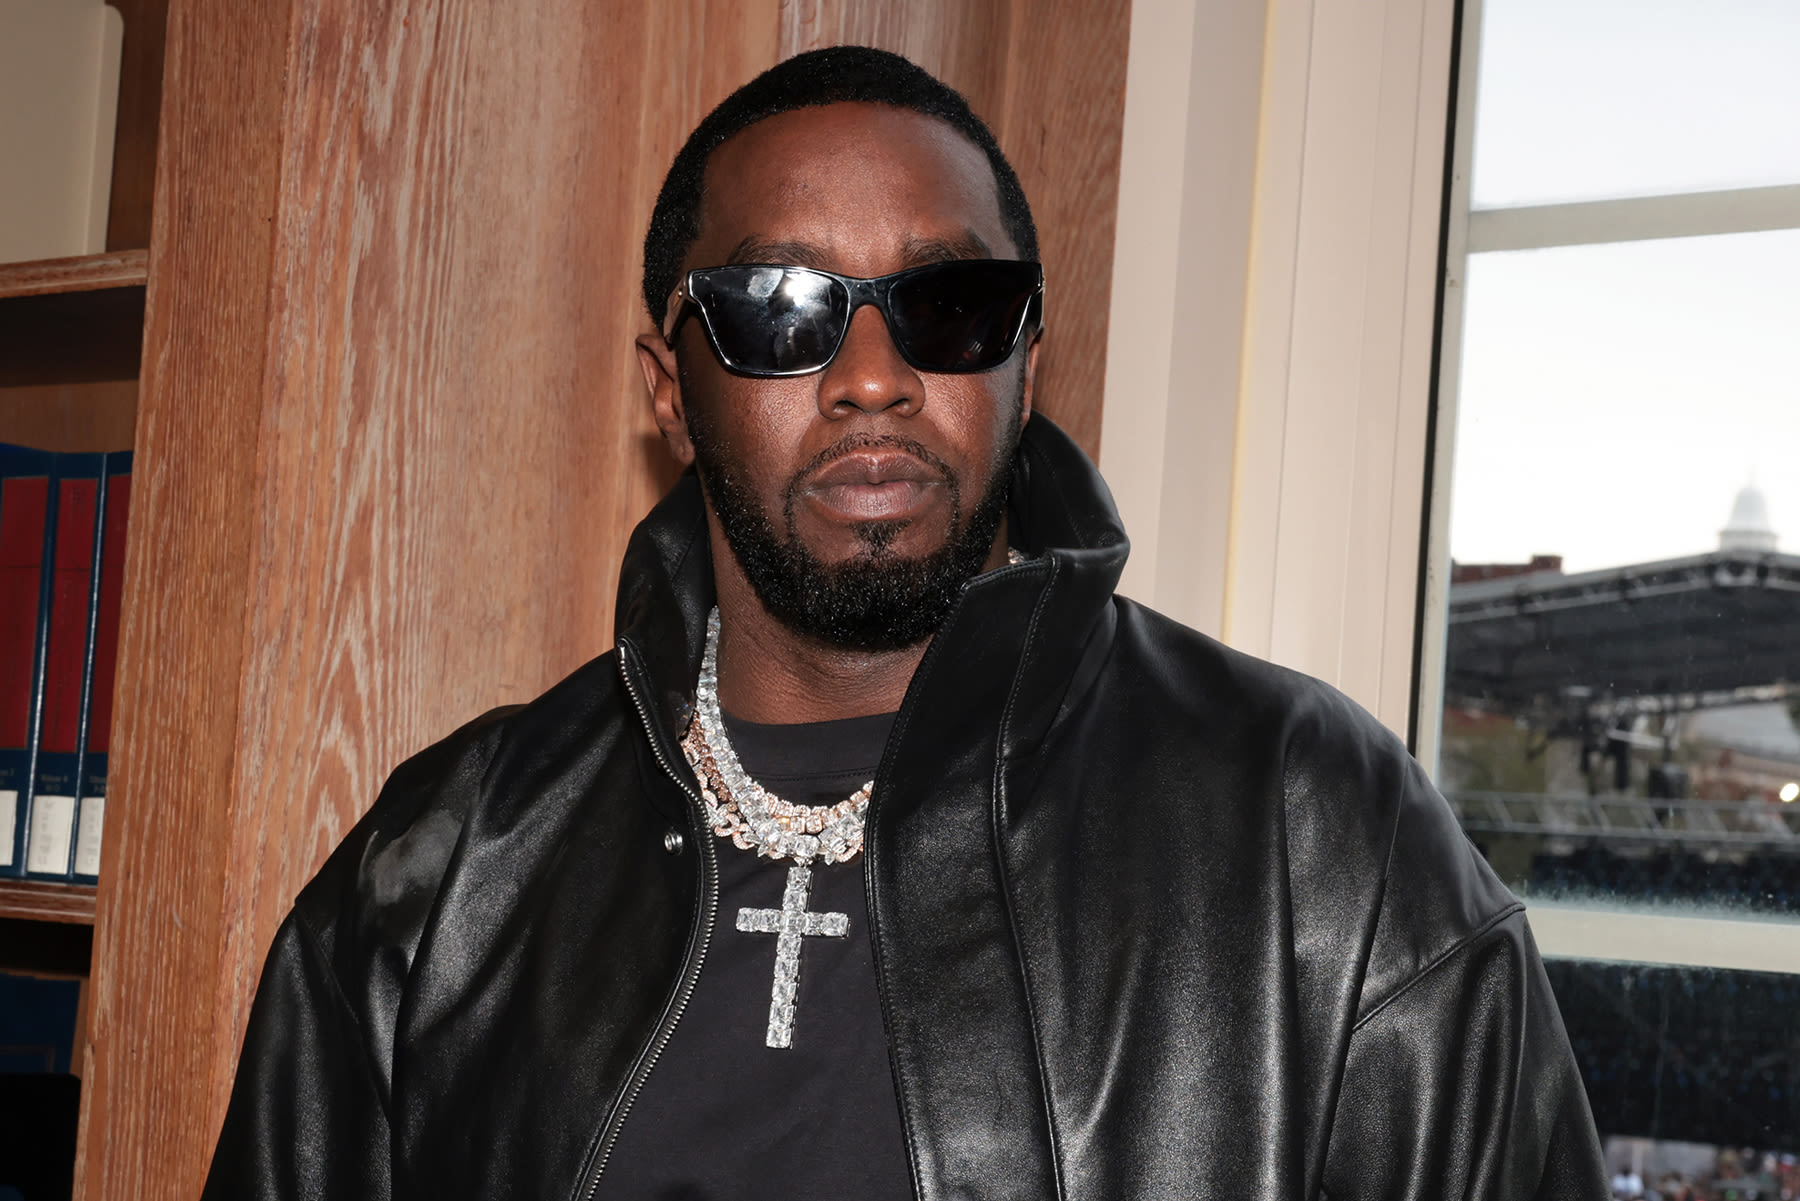 Sean Combs Sells Stake in Revolt, the Media Company He Co-Founded